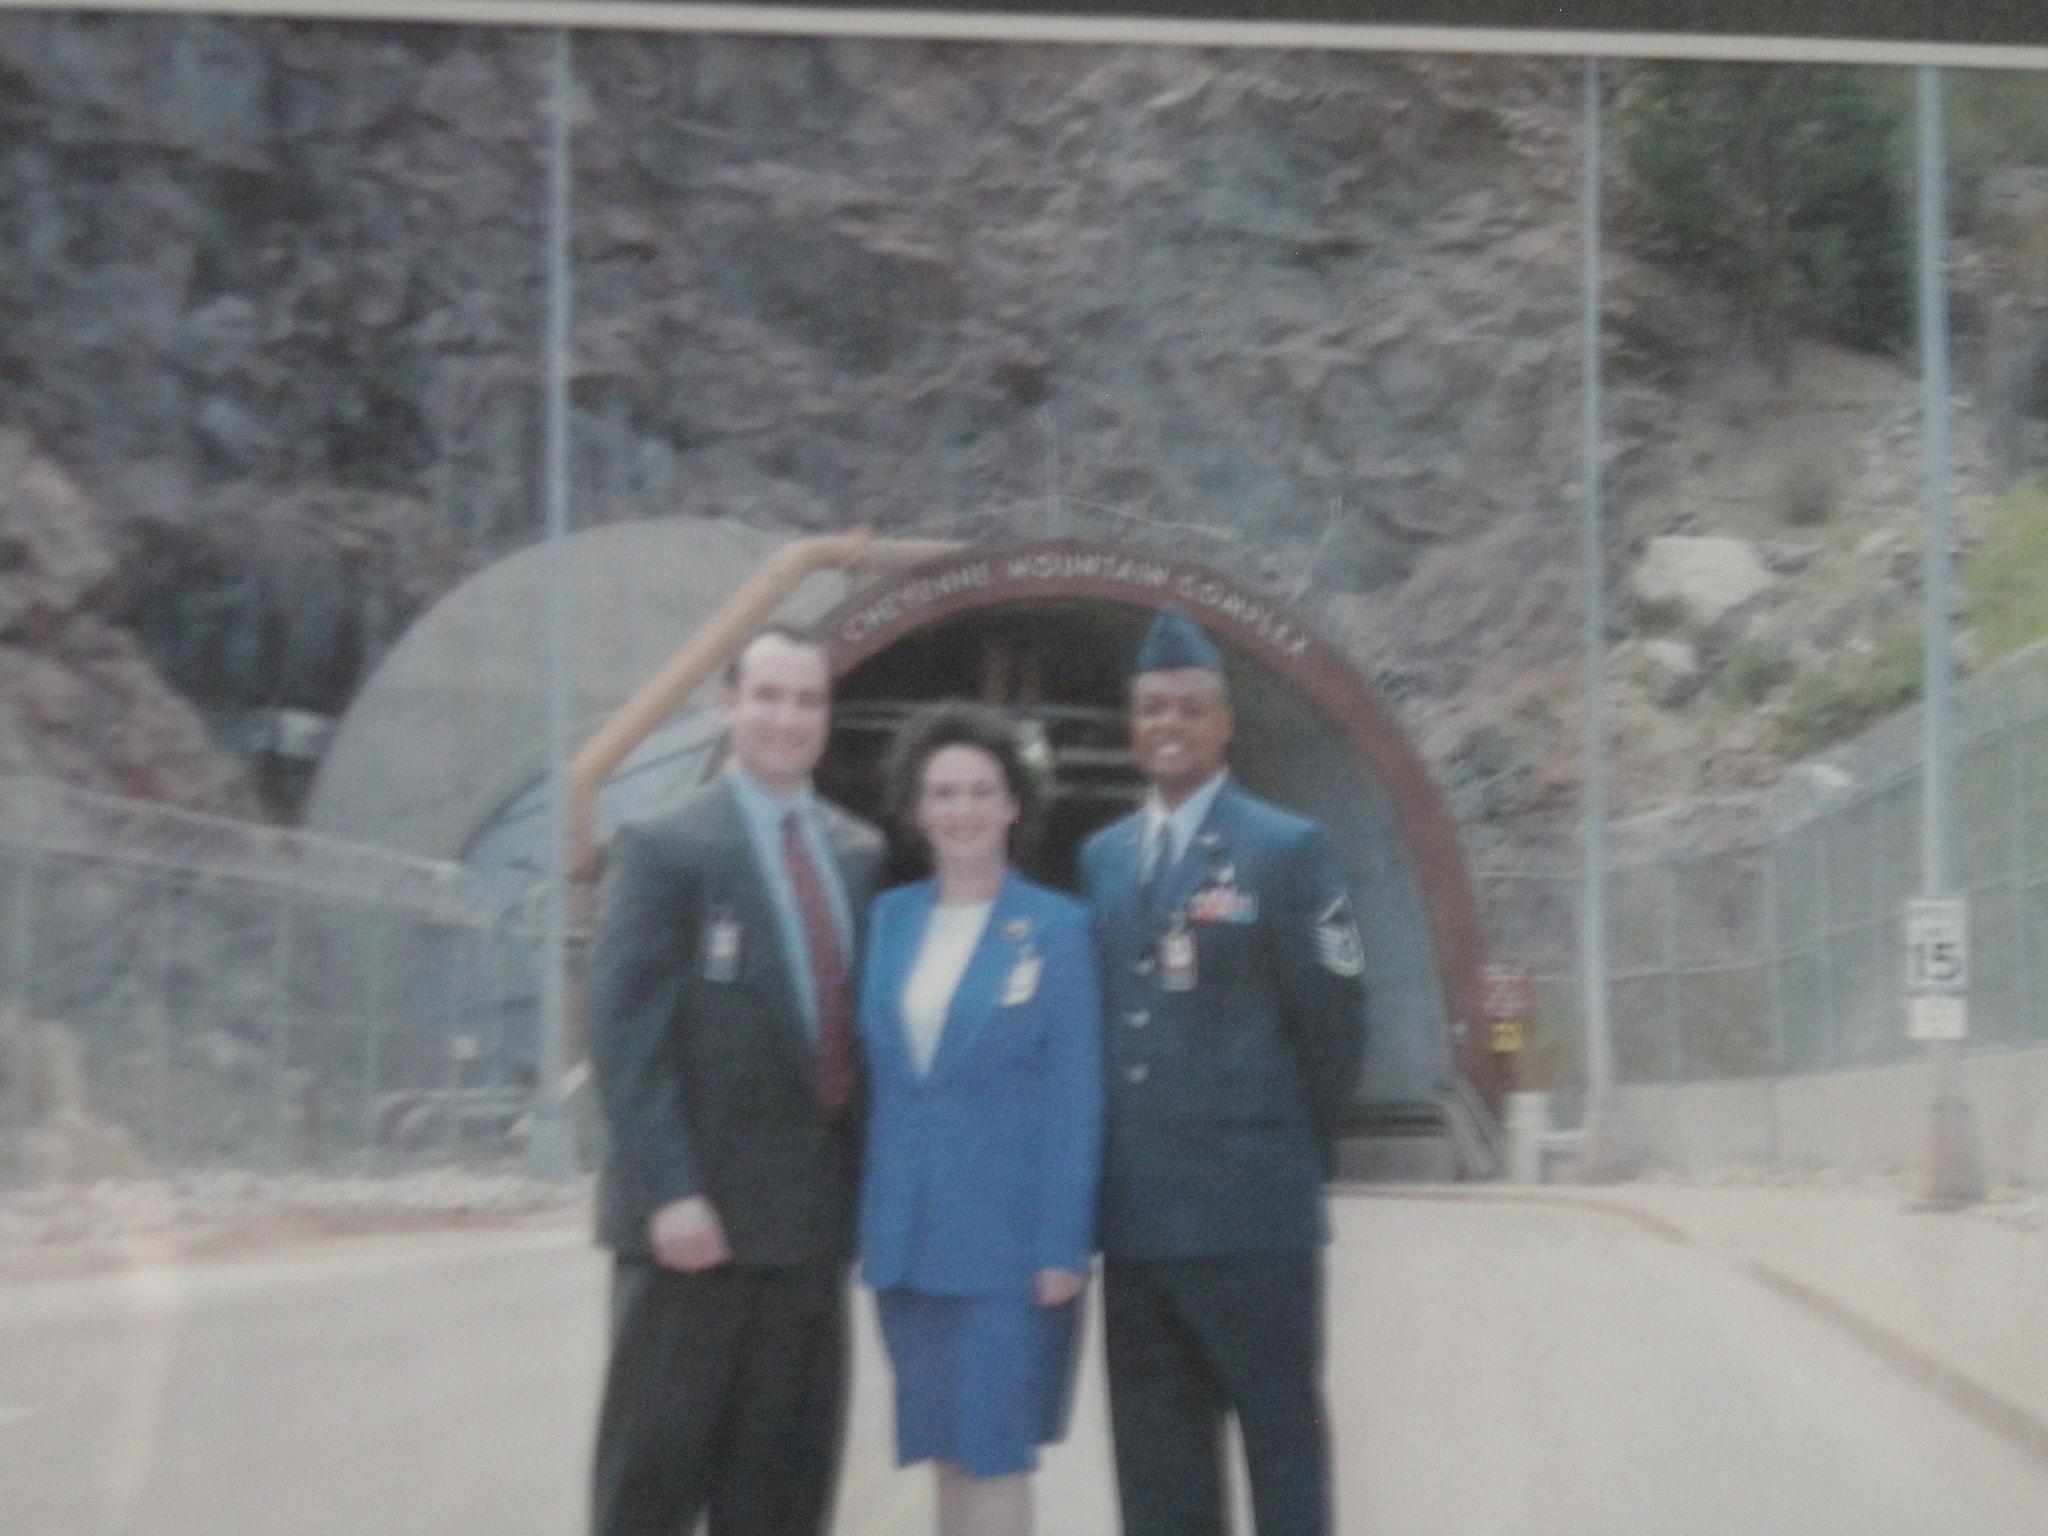 At base of Cheyenne Mountain, going into NORAD